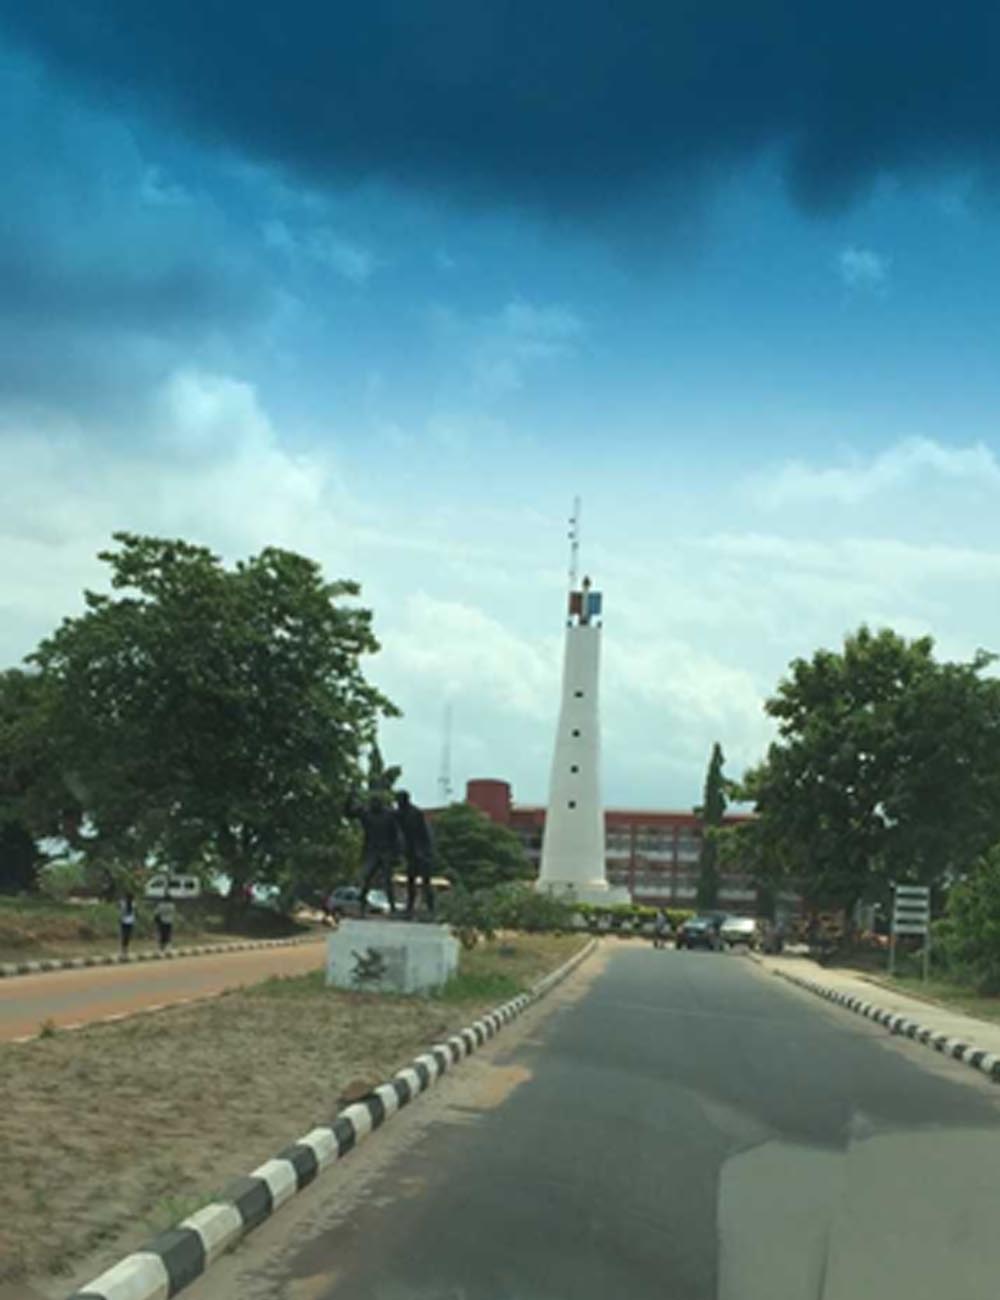 LED Street Lights project in Nigeria